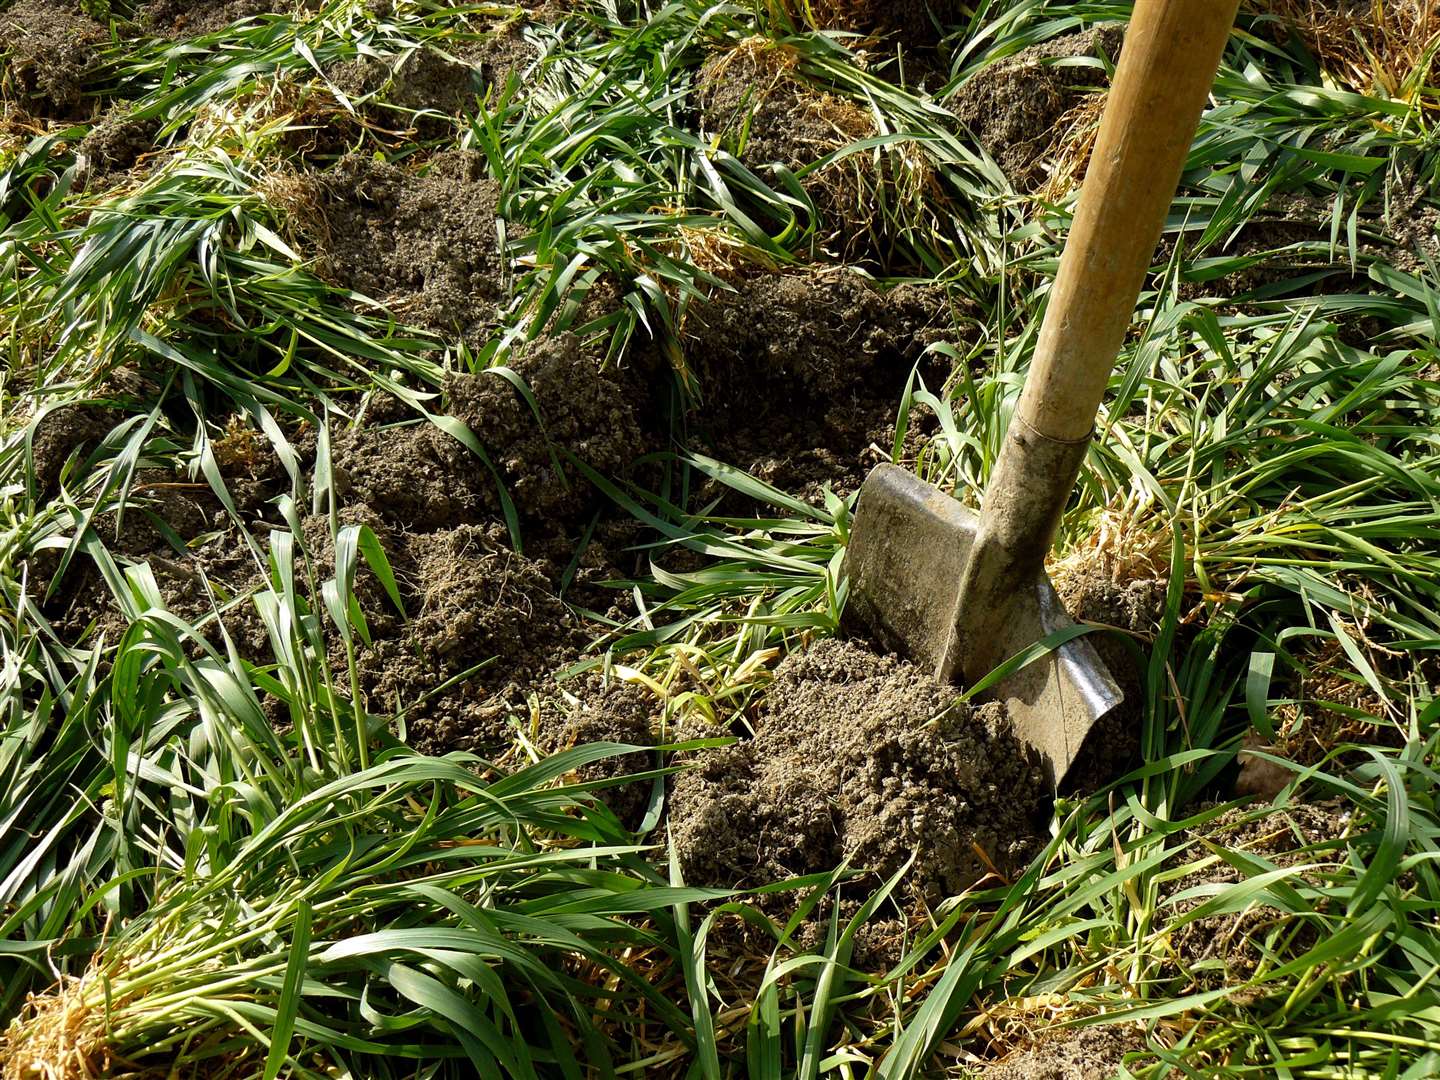 Green manure crops can be dug back into the soil. Picture: iStock/PA